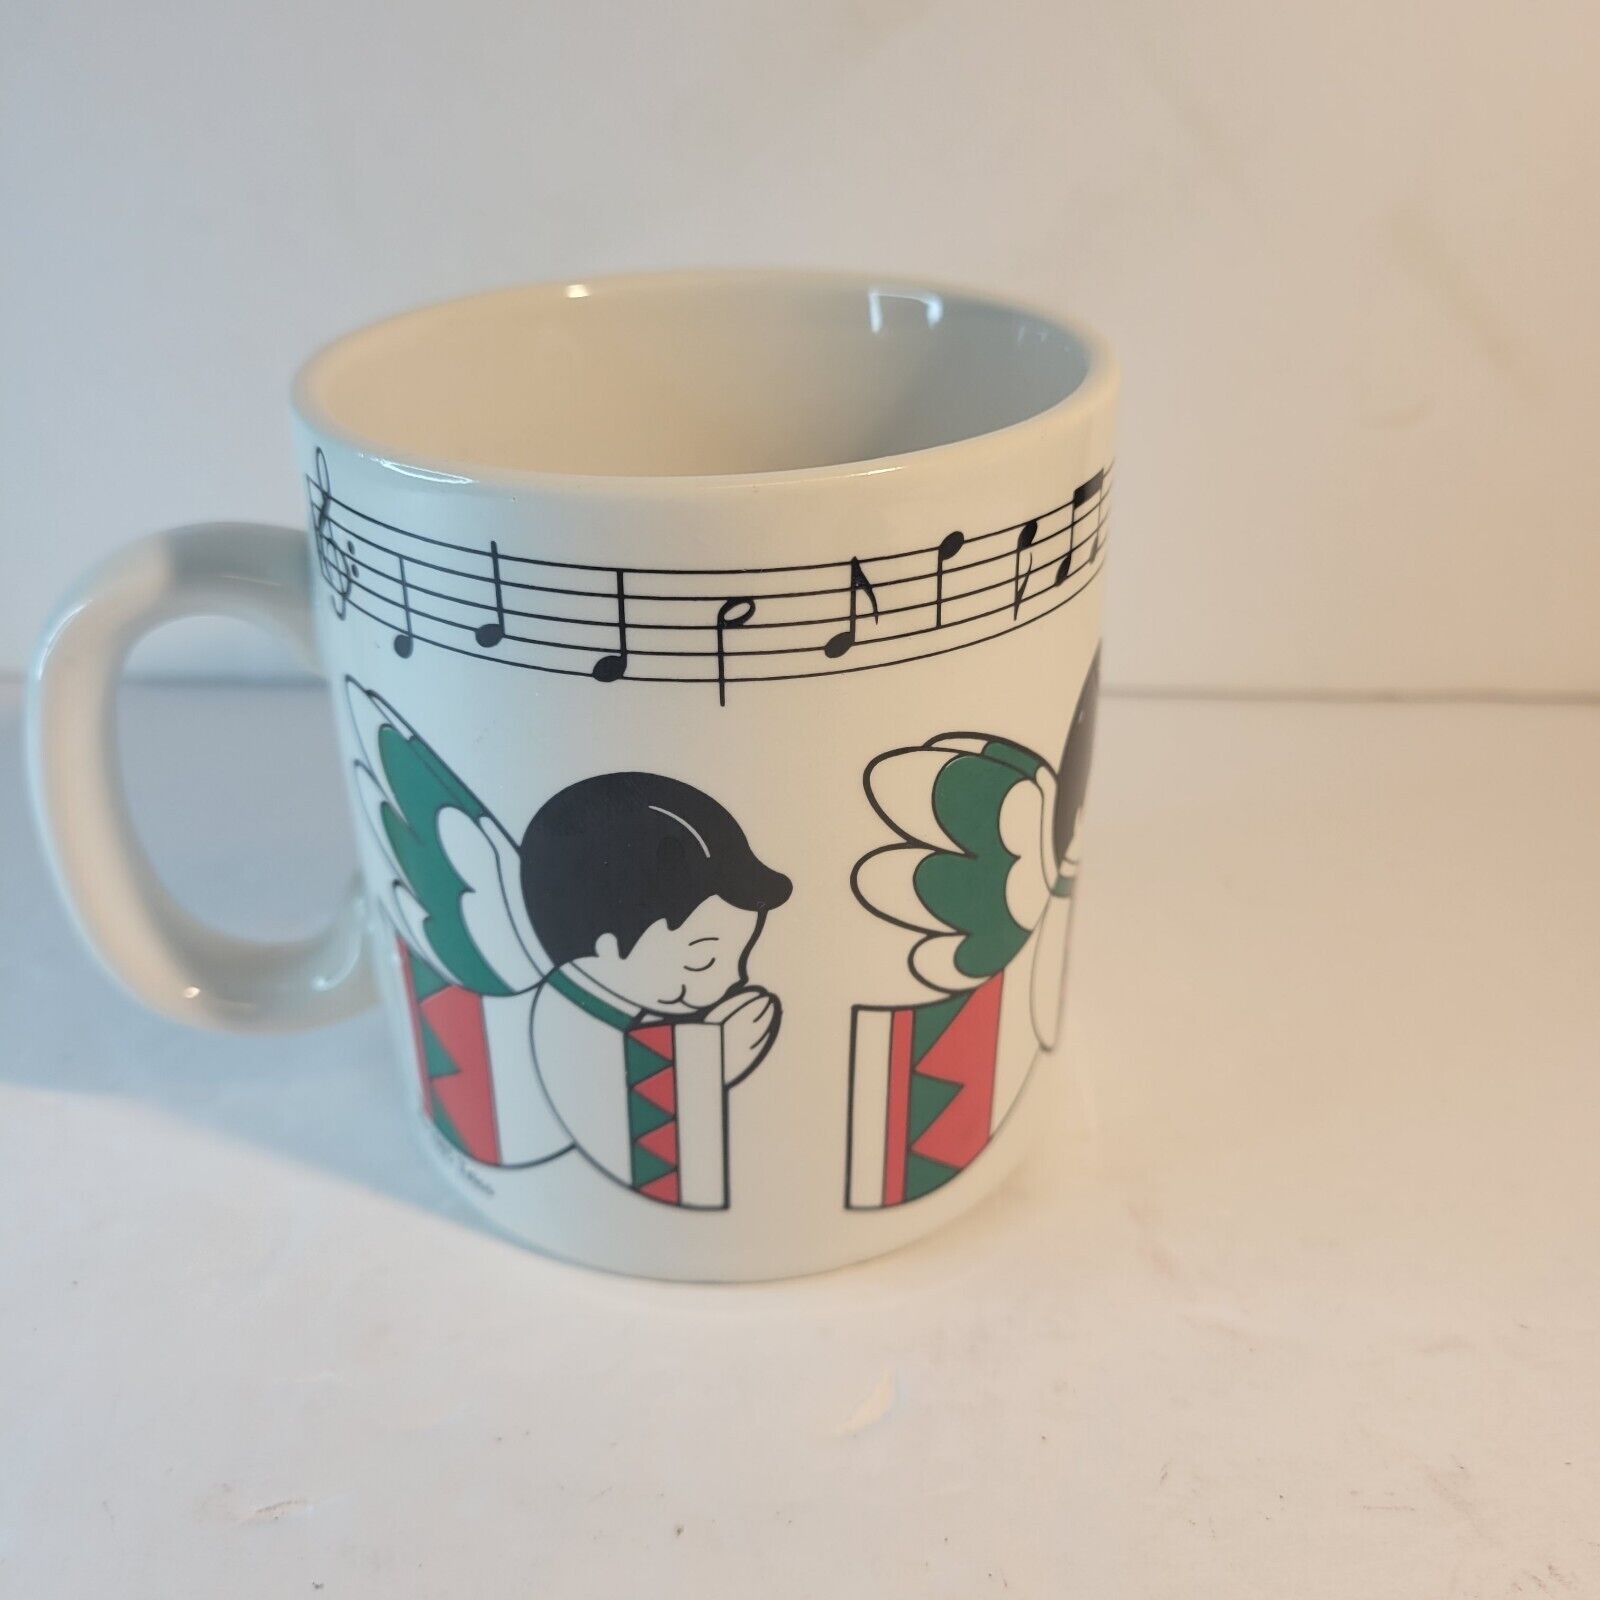 Holiday Angels Coffee Mug Vintage 1985 Telco Green White & Red Musical Notes